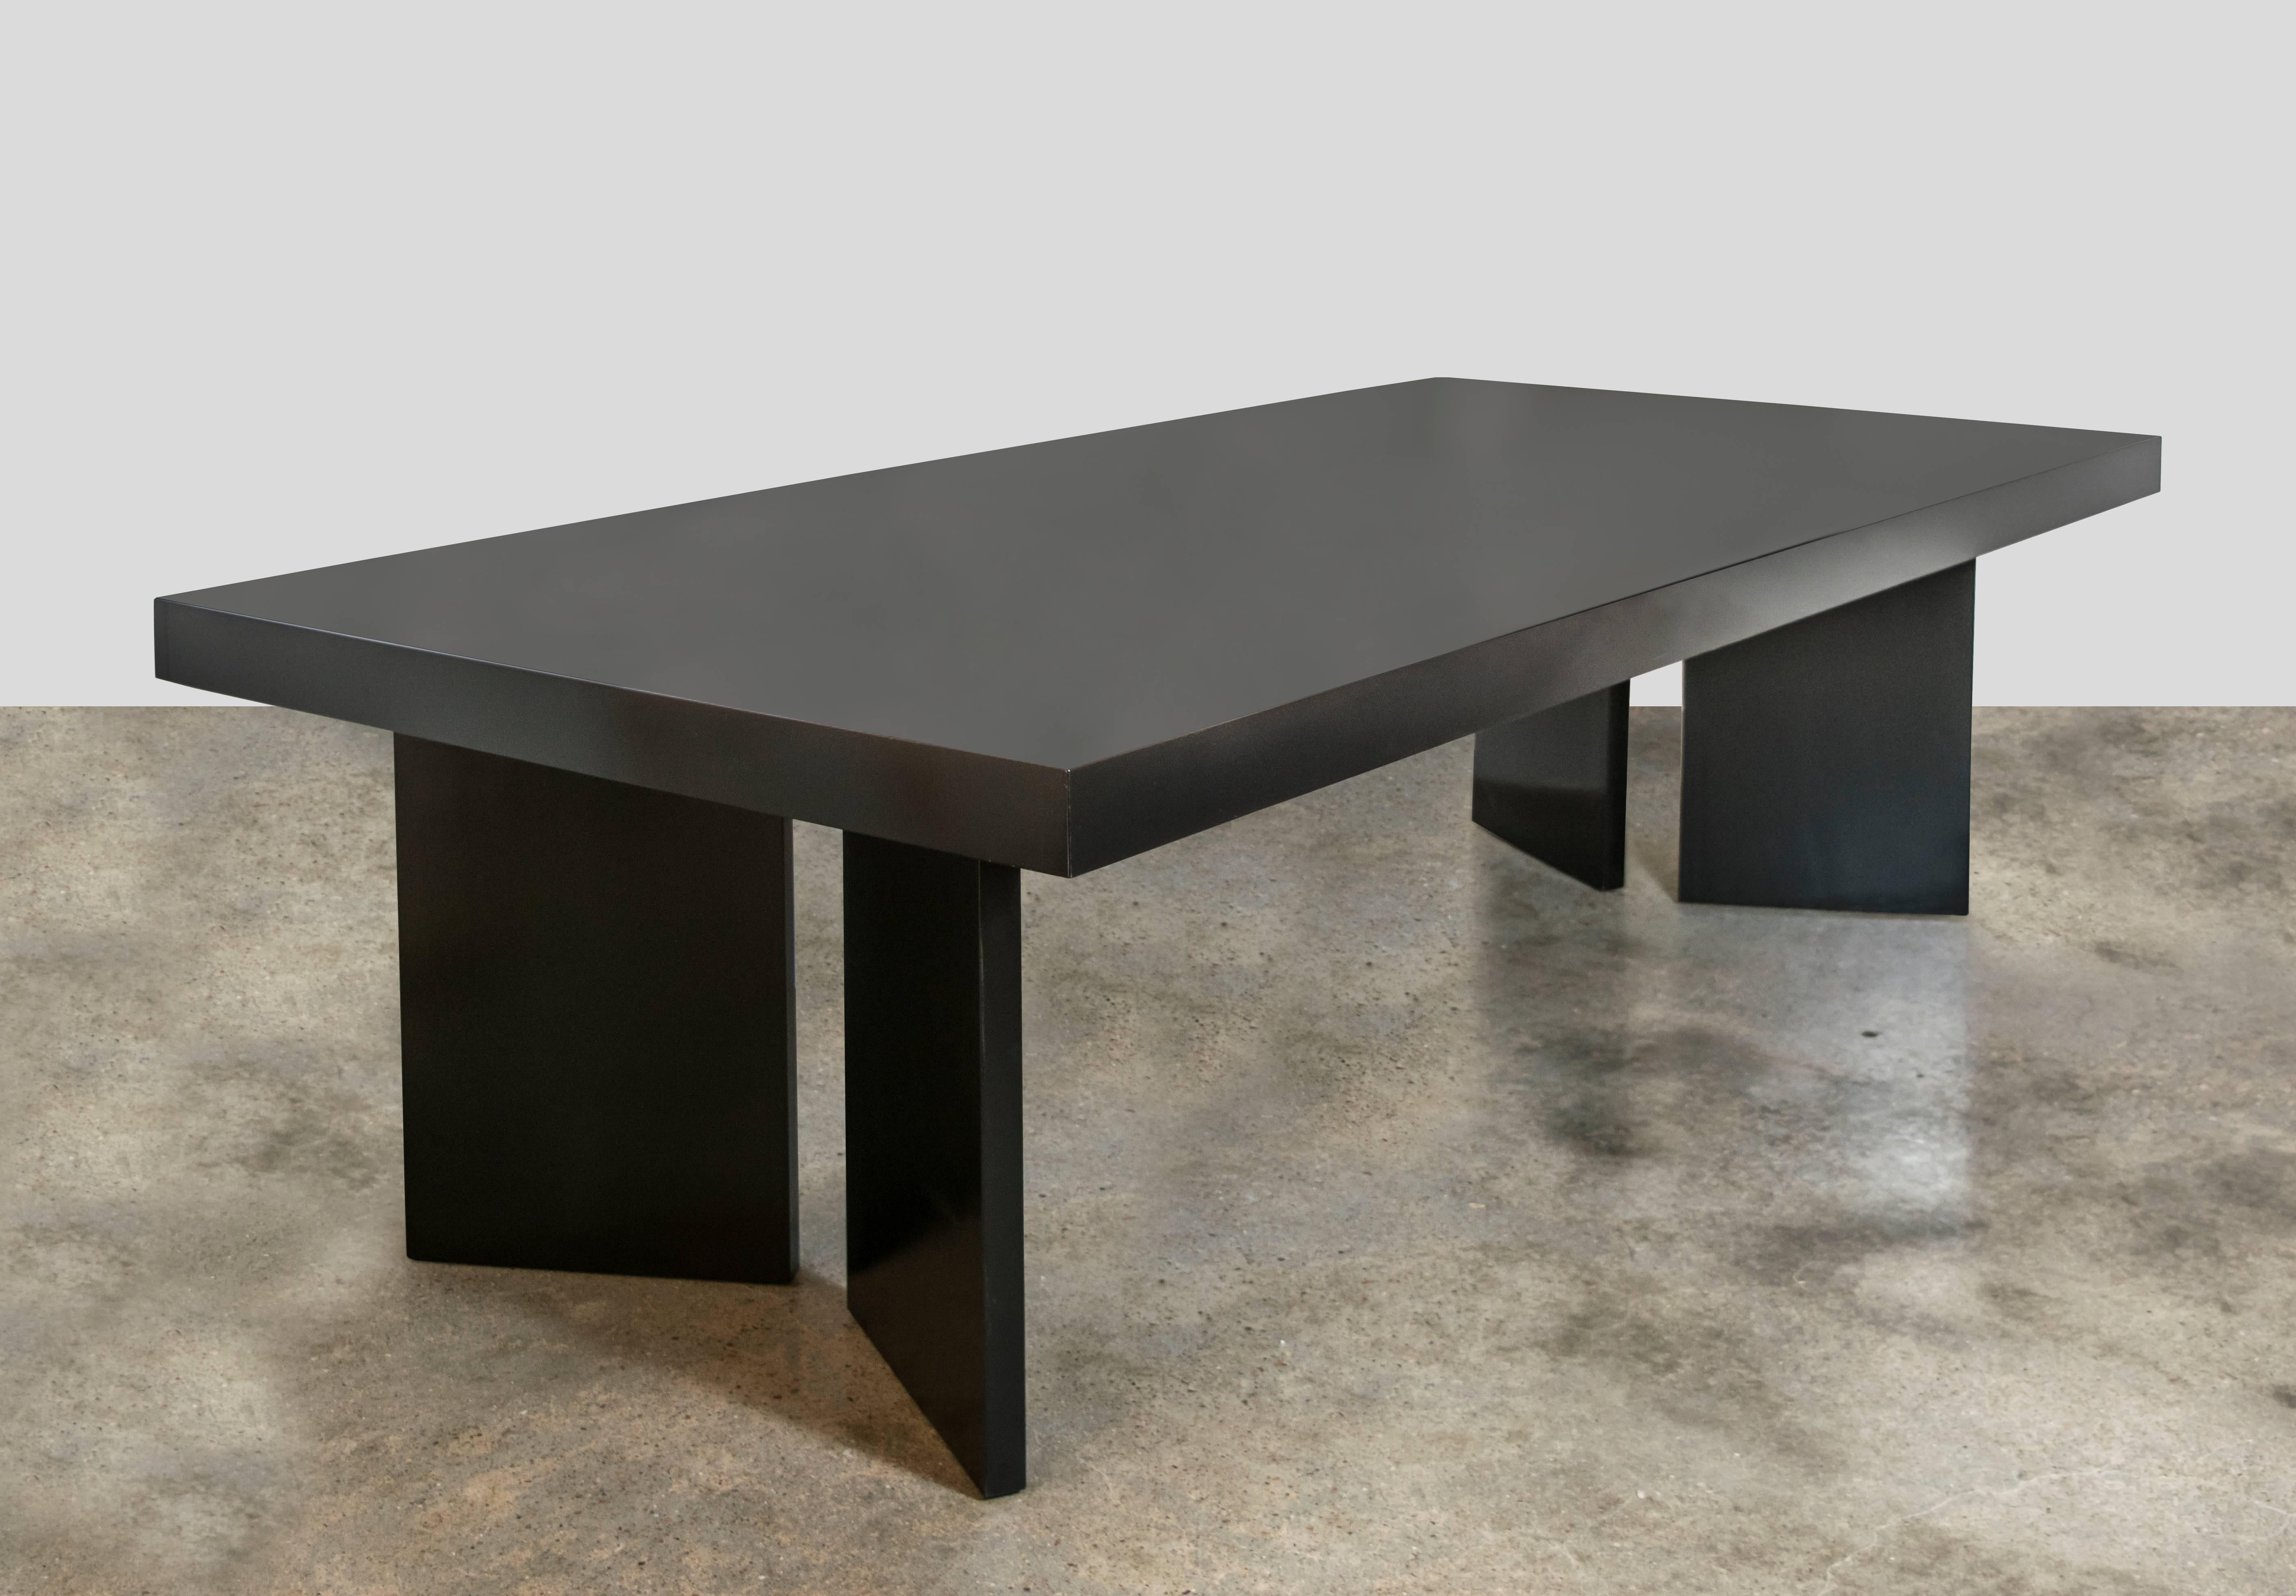 Gorgeous custom mahogany dining table from the 1950s. Ebonized lacquered finish with V-shaped pedestal leg supports. One solid 8 foot long piece, very well constructed. Lacquer finish is glass-like and exquisite.